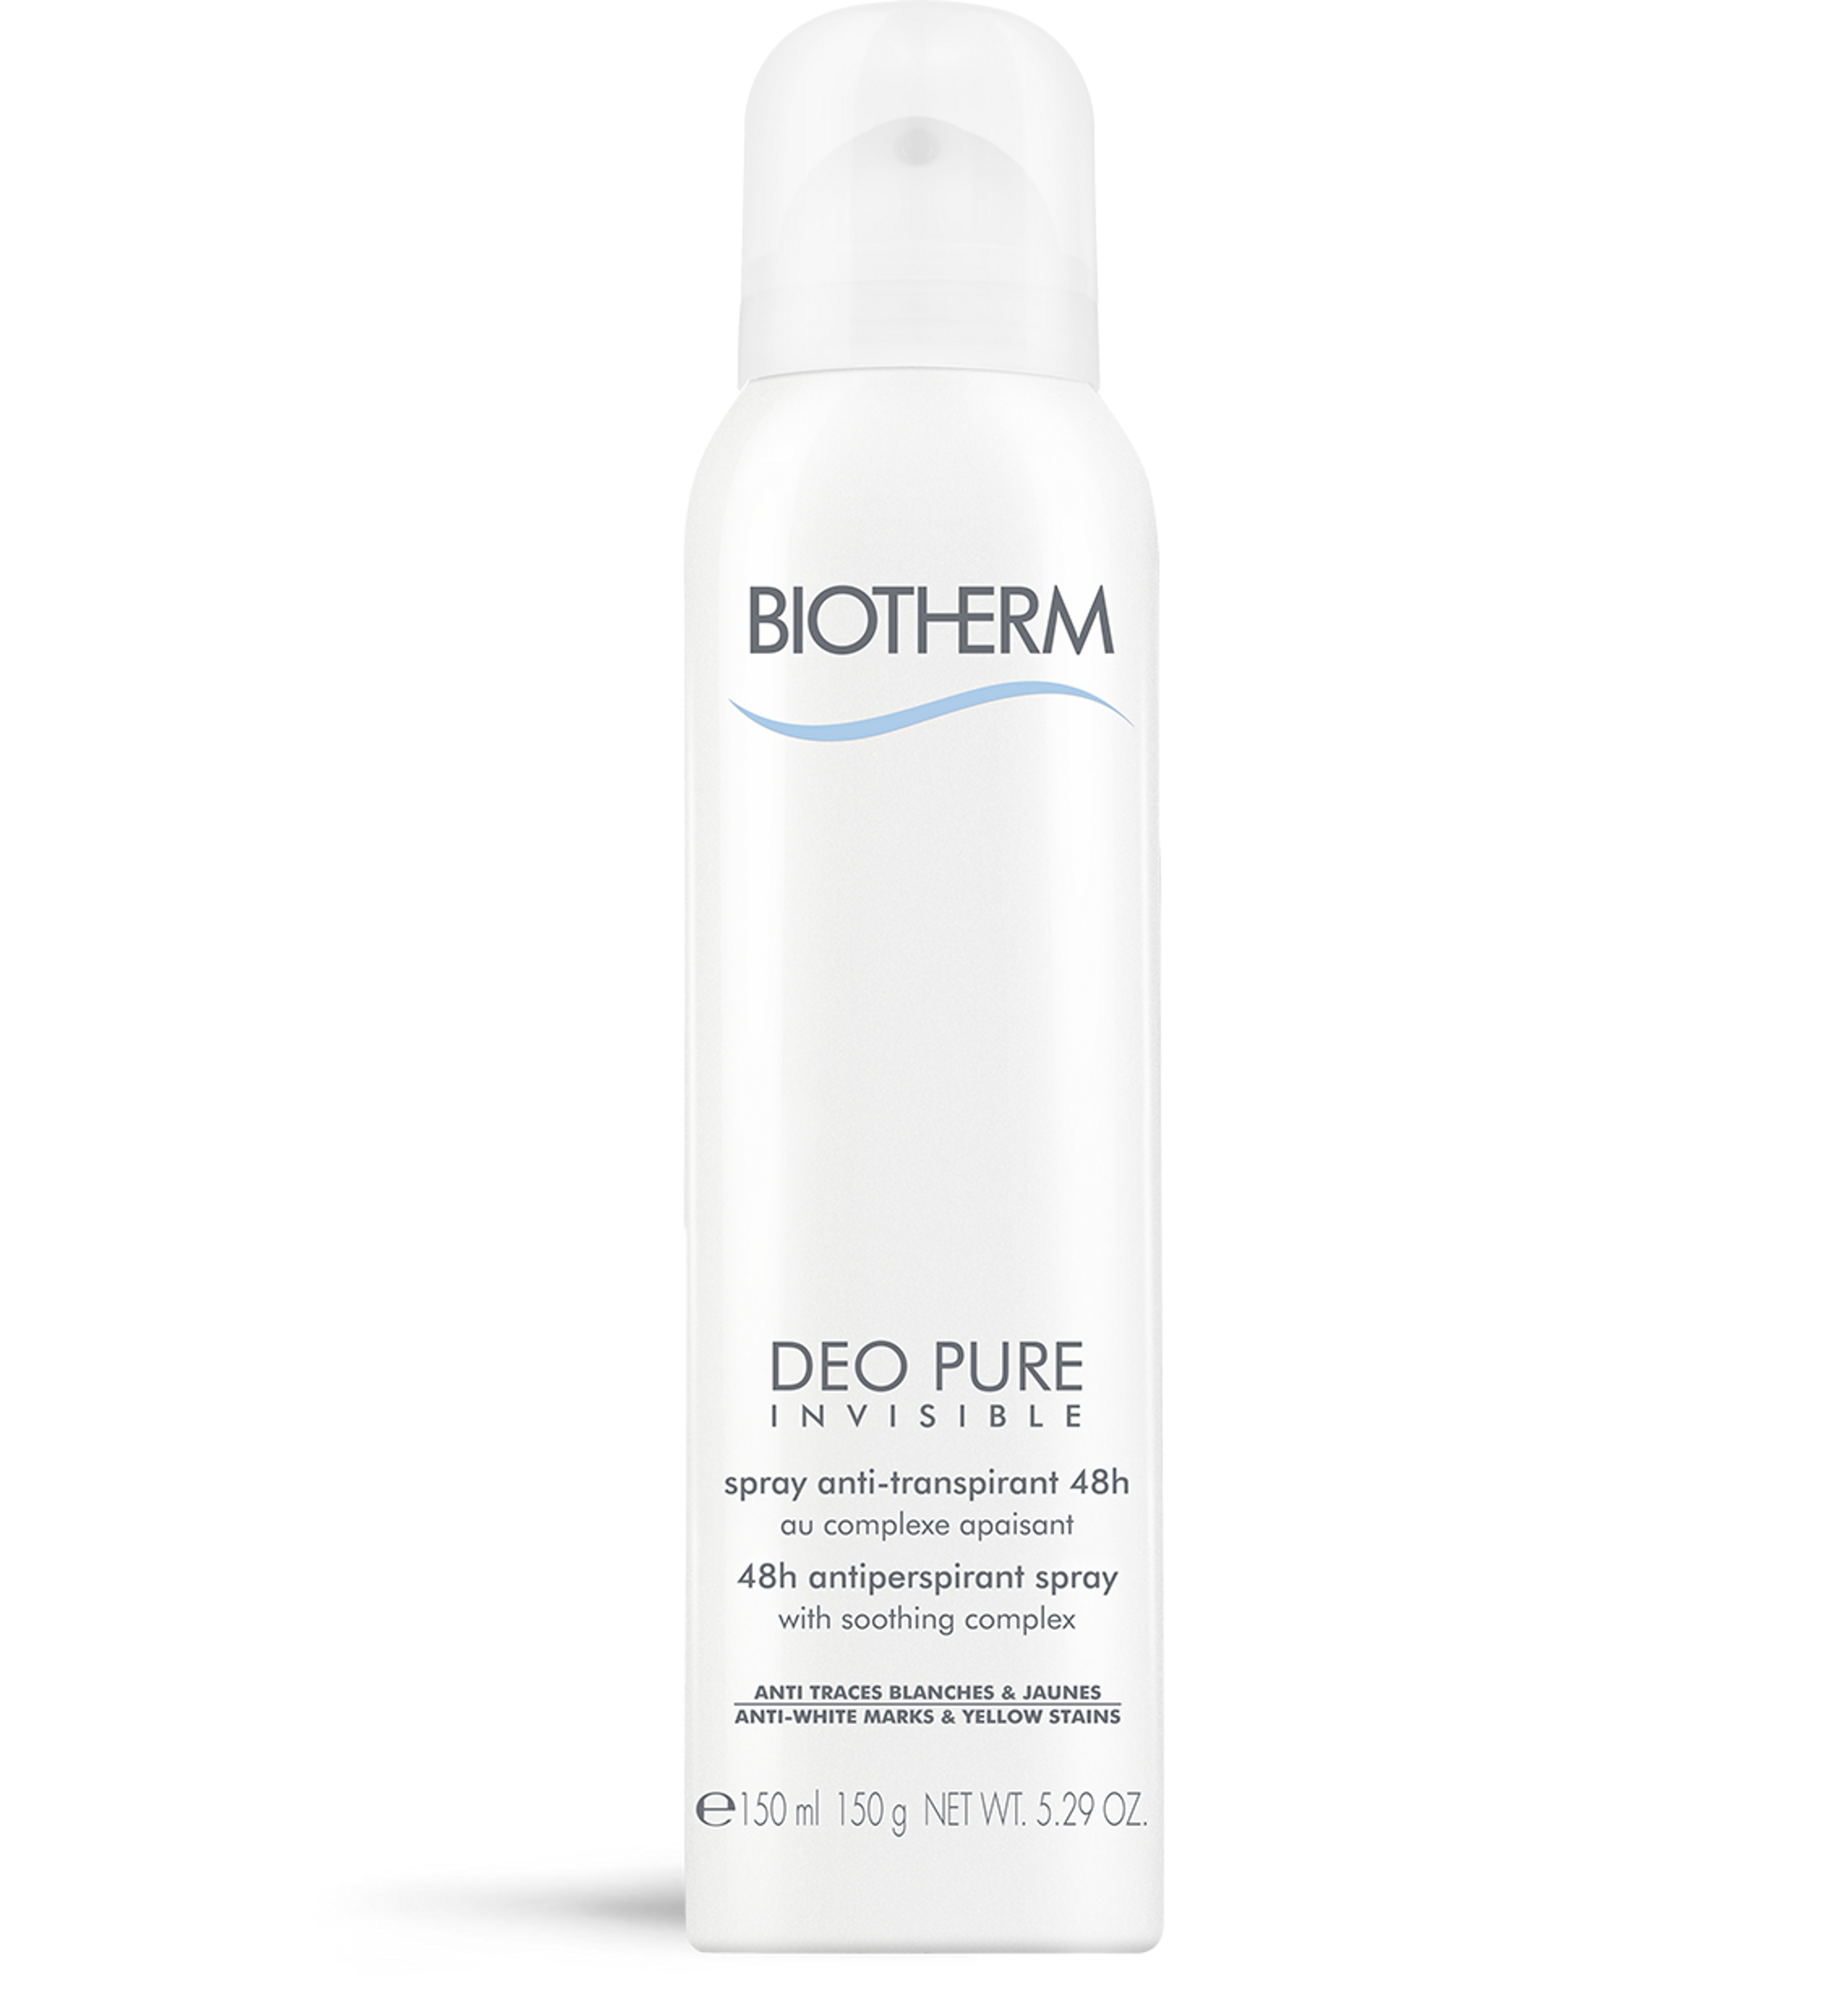 Biotherm Deo Pure Invisible 1